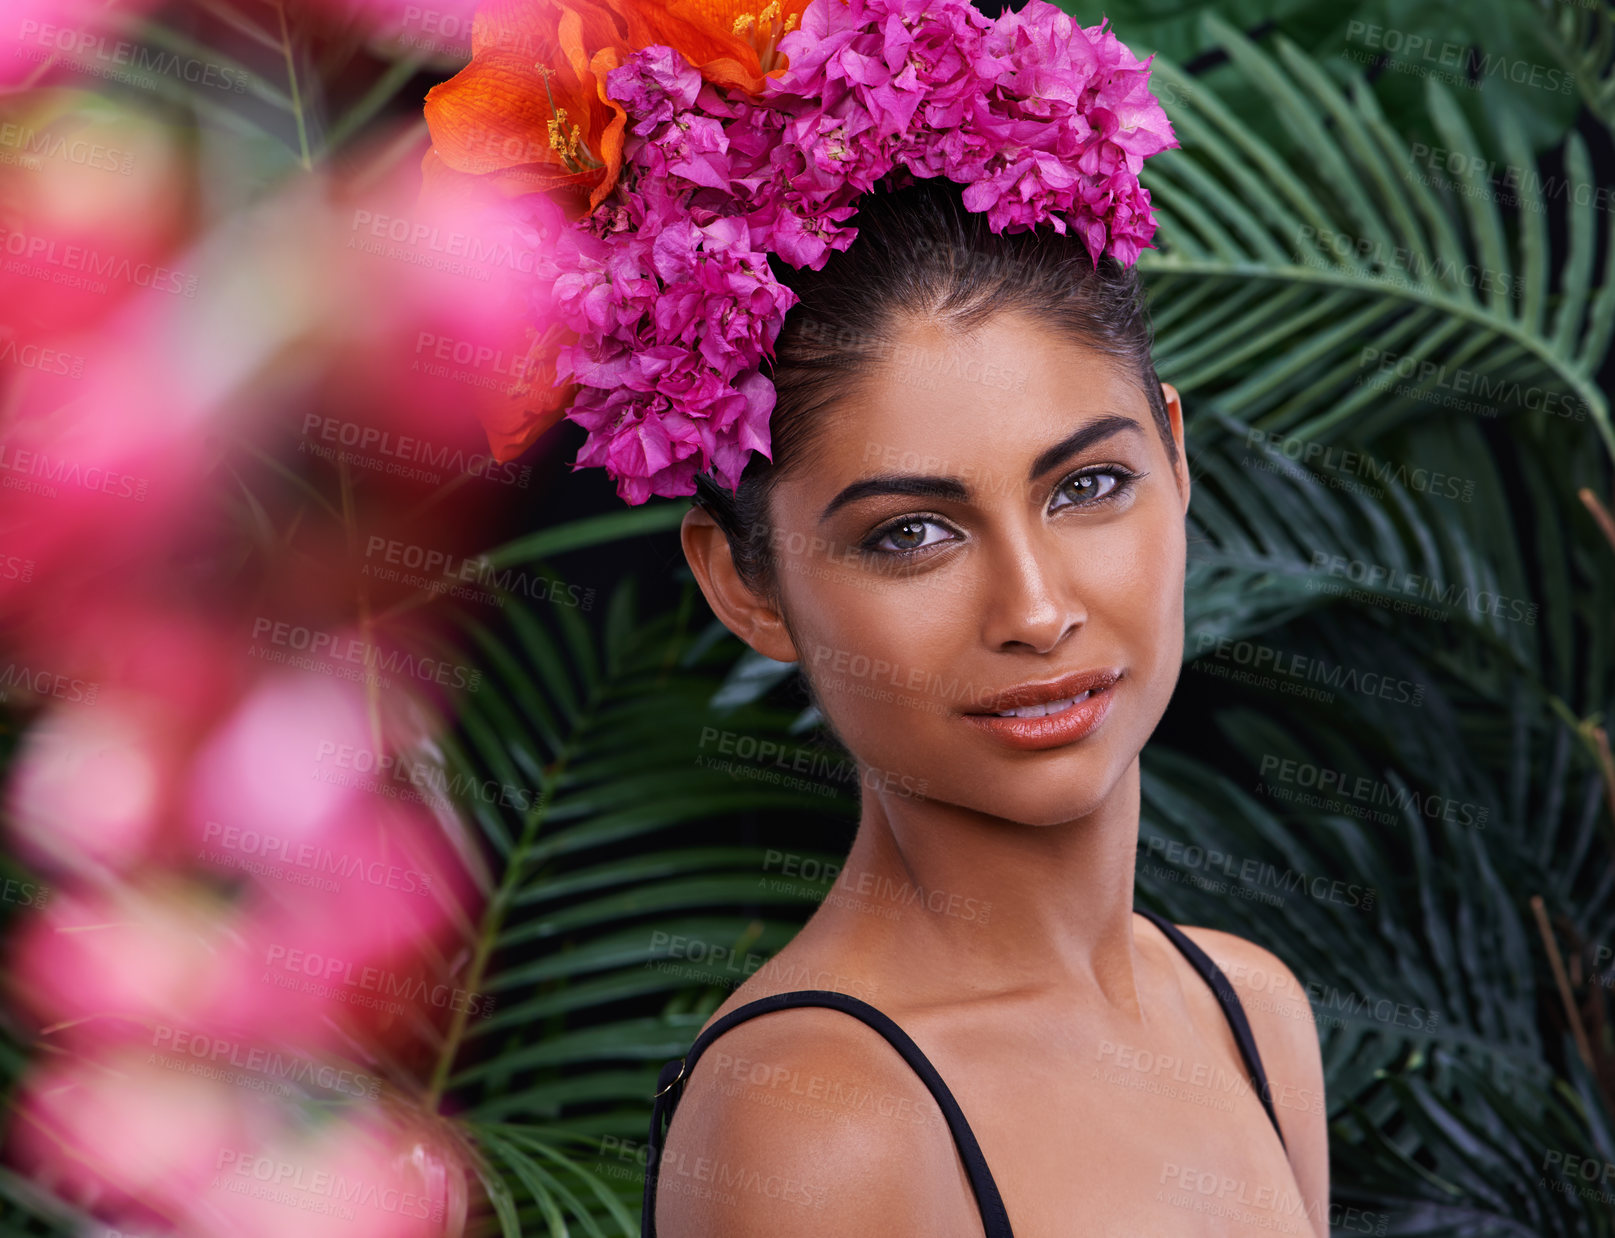 Buy stock photo Jungle, portrait or woman with flowers for natural beauty, cosmetics or wellness in nature aesthetic. Color, Indian person or face of model with at eco friendly skincare, plants or spring floral art 